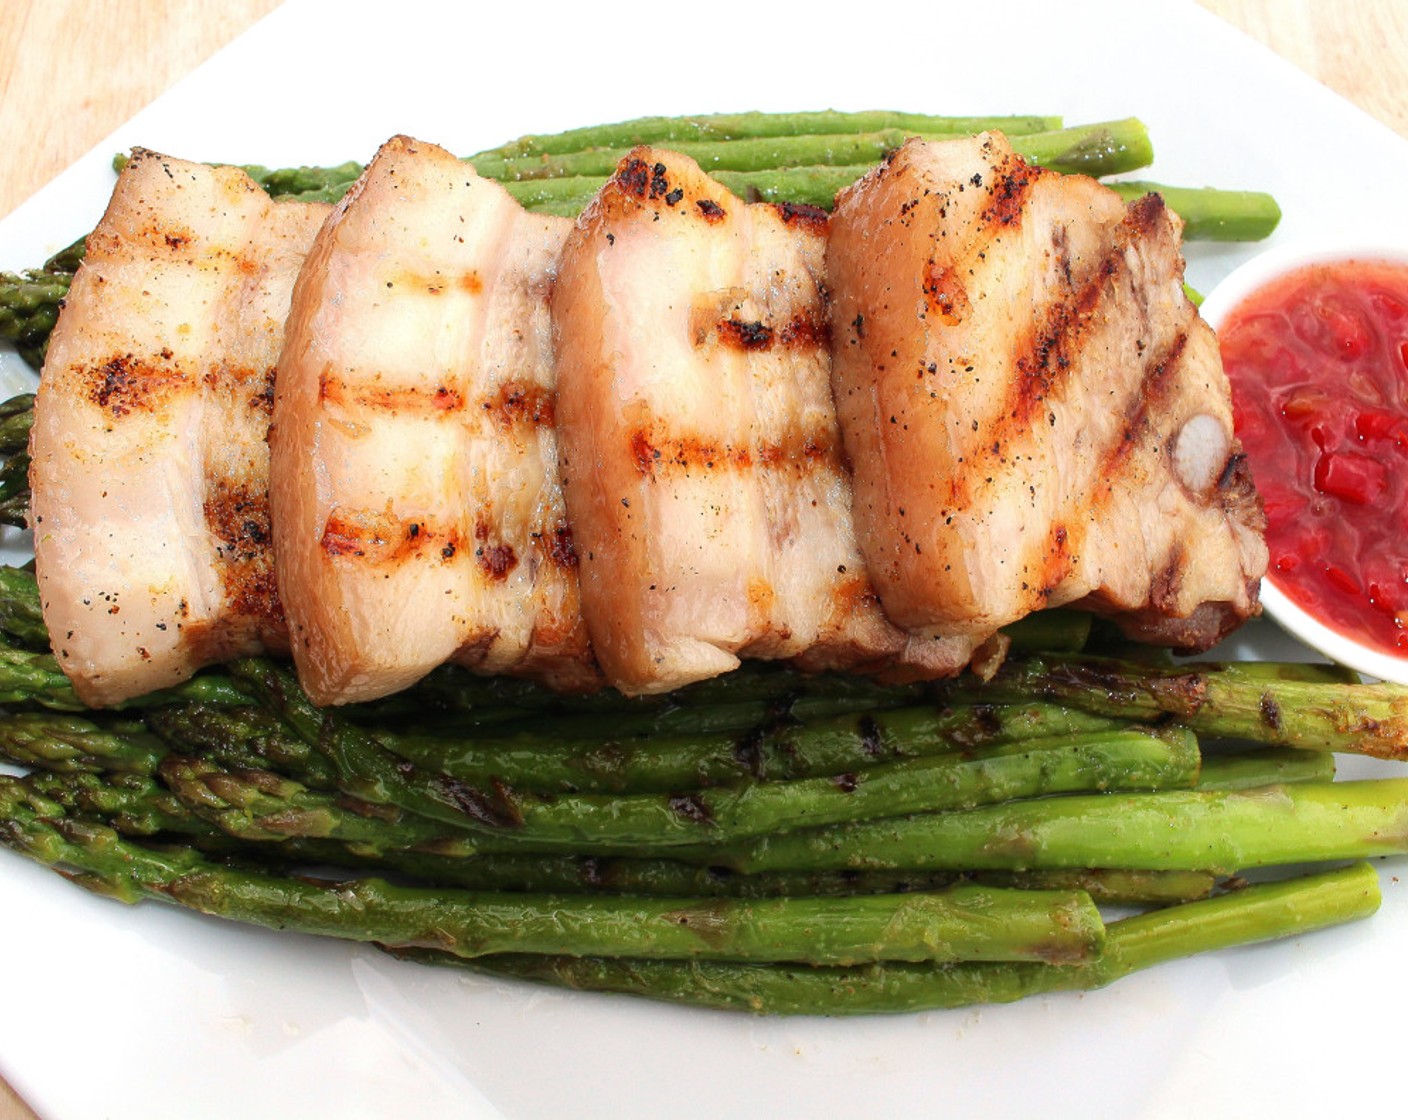 Grilled Pork Belly and Green Asparagus